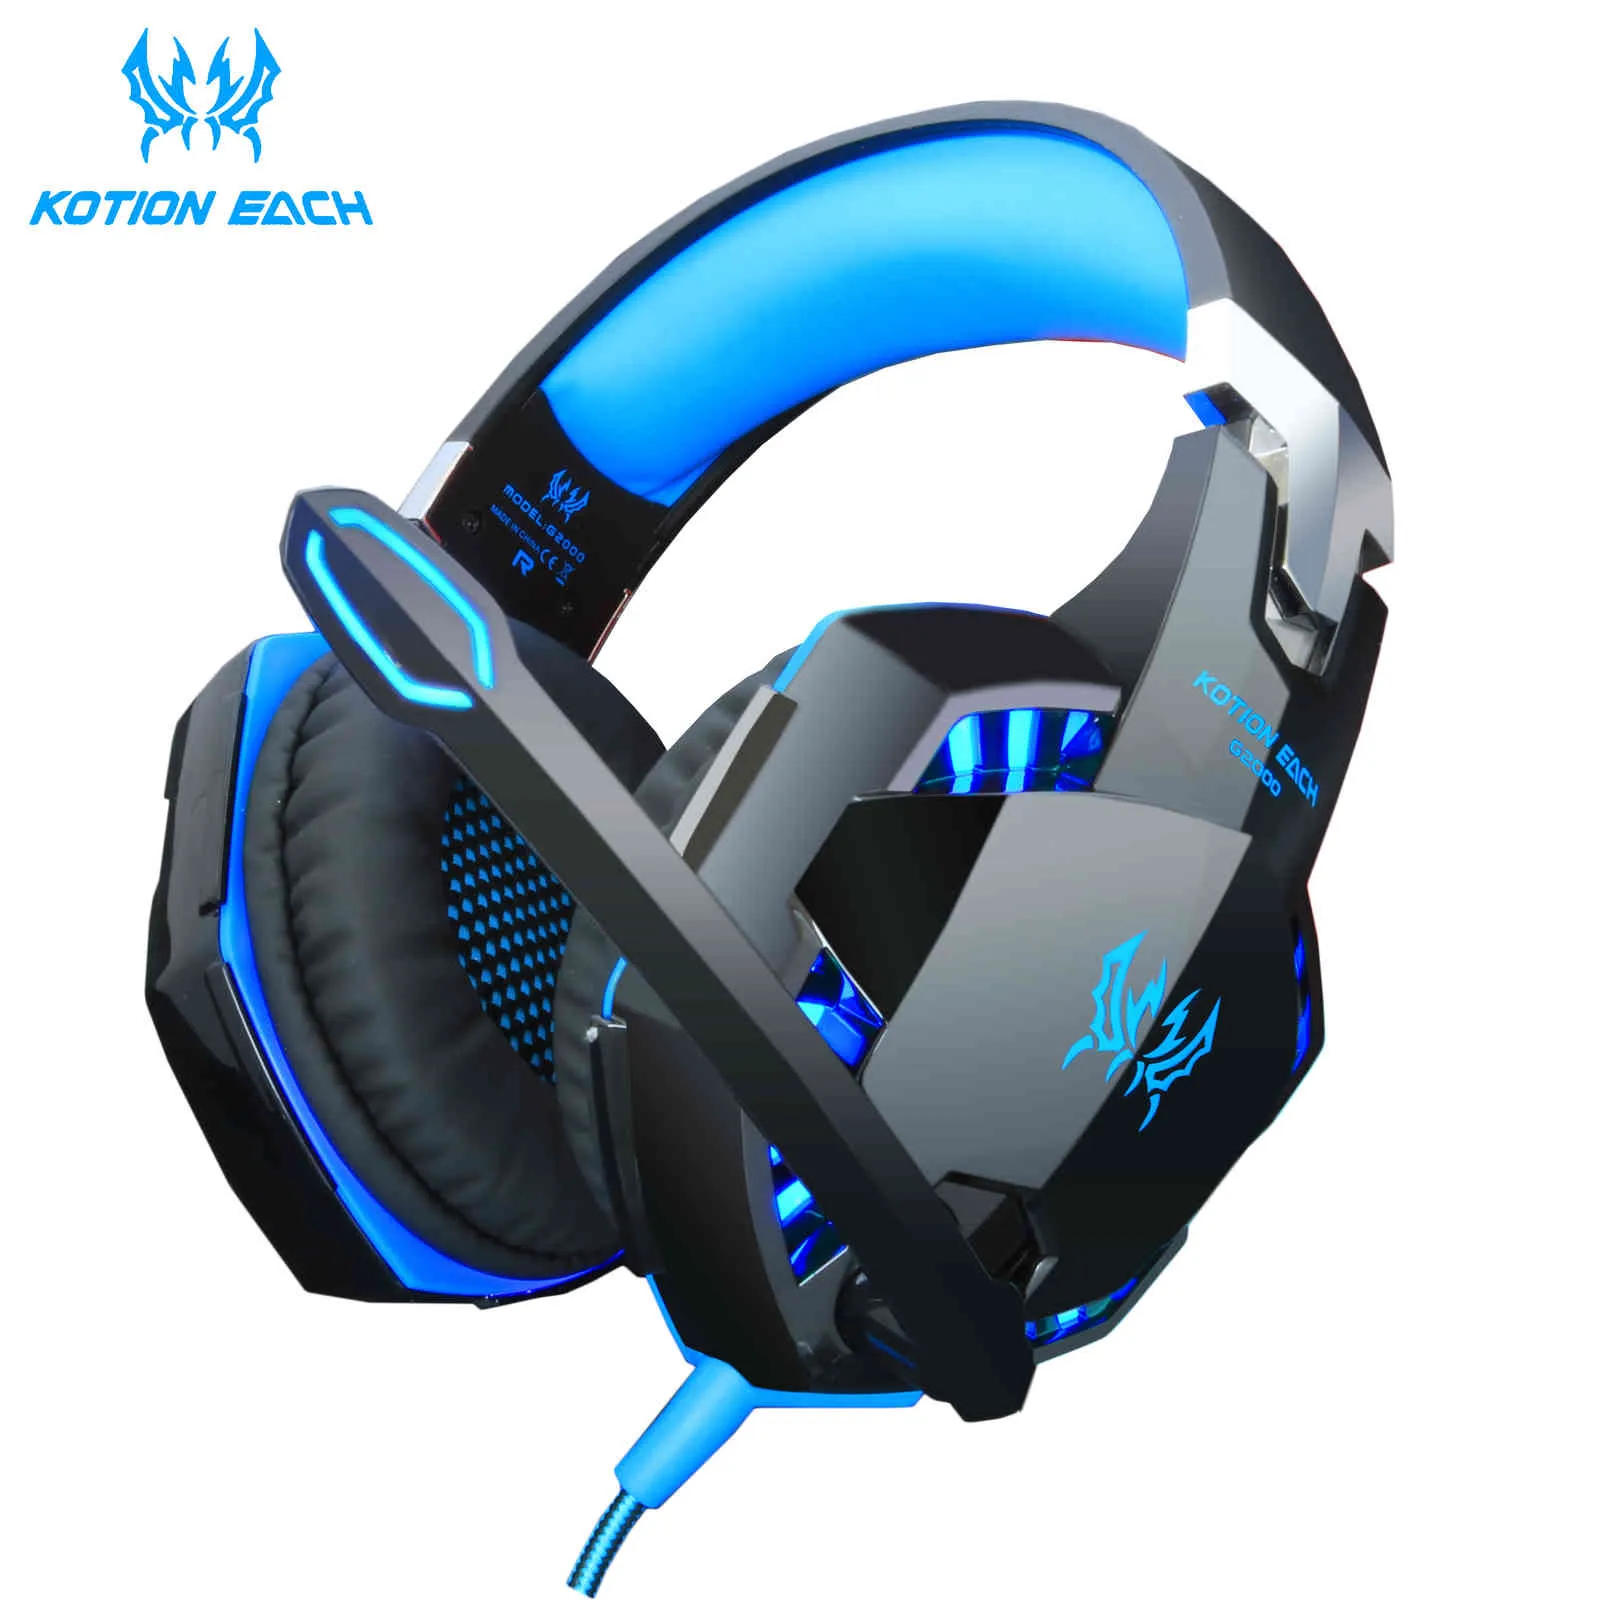 Headset over-ear Wired Game Earphones Gaming Headphones Deep bass Stereo Casque with Microphone PS4 xbox PC Laptop gamer